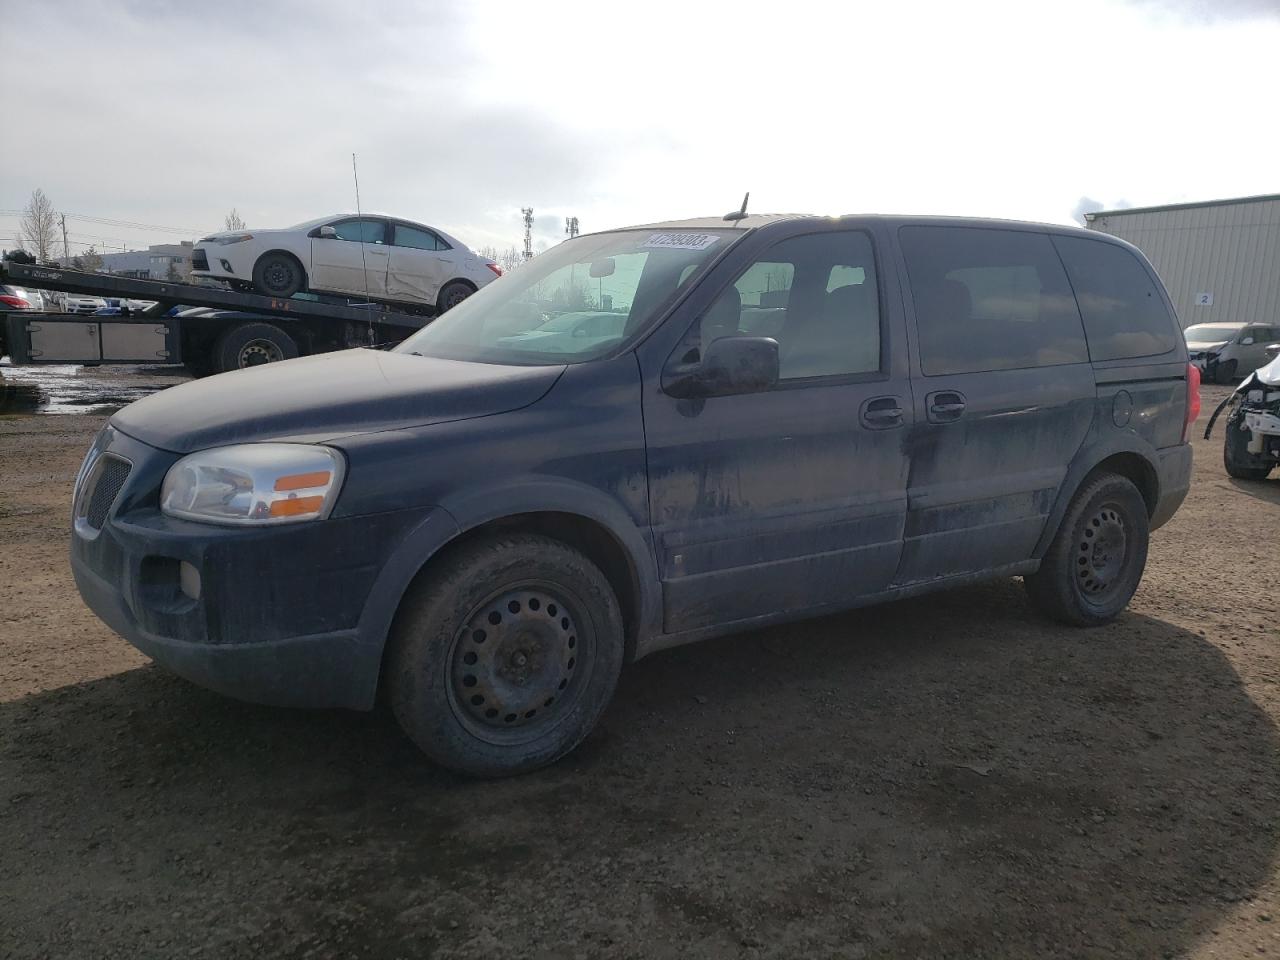 2009 Pontiac Montana SV6 for sale at Copart Rocky View County, AB Lot  #47299*** | SalvageReseller.com